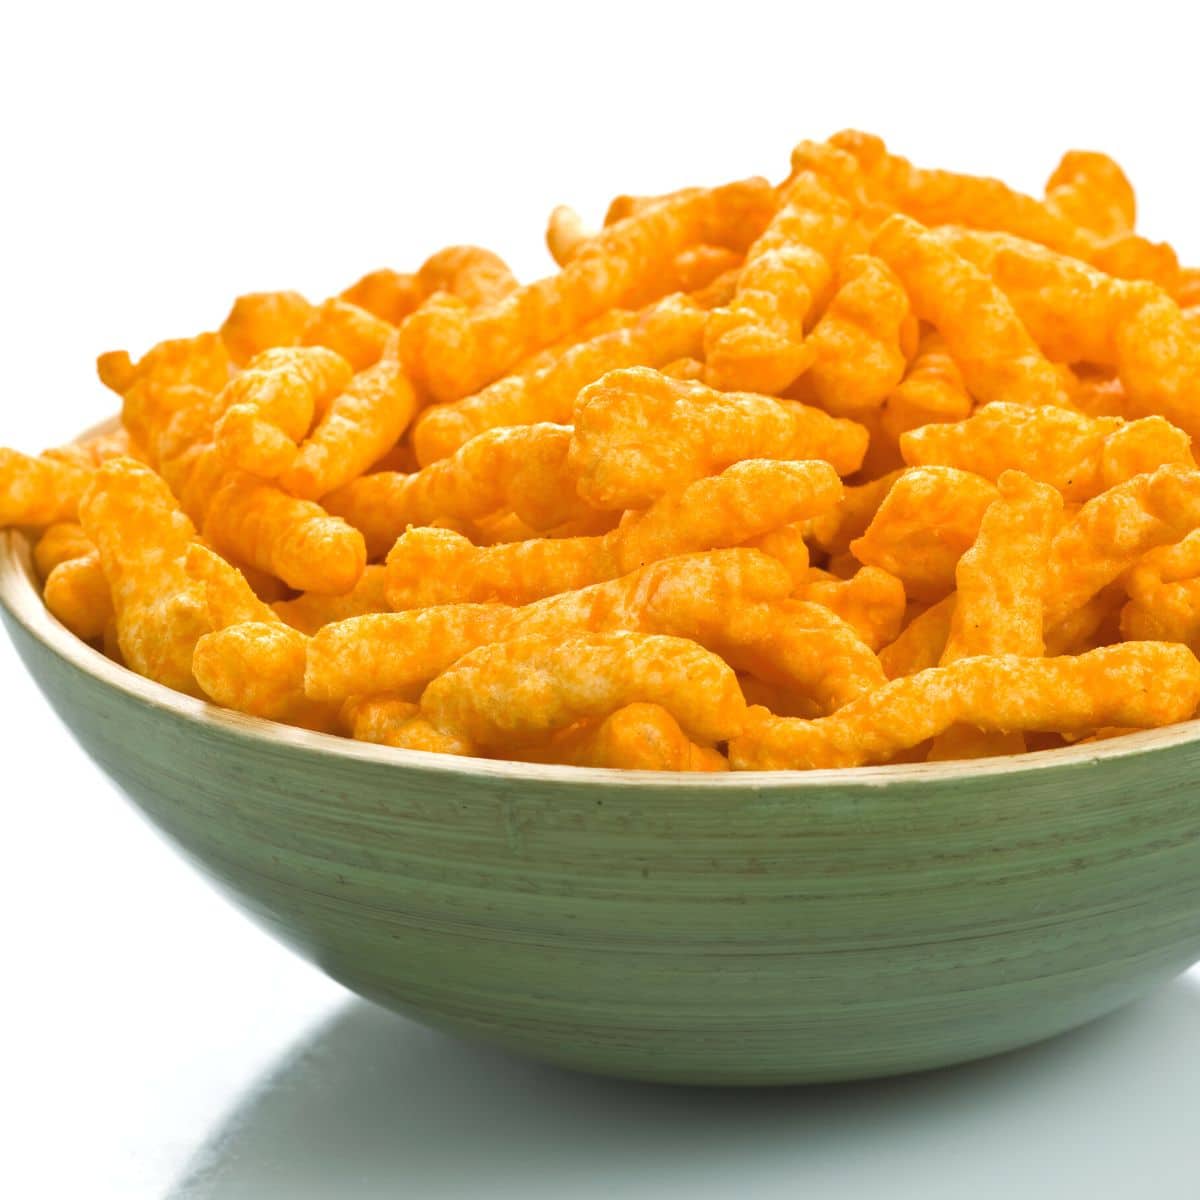 A green bowl filled with Cheetos.